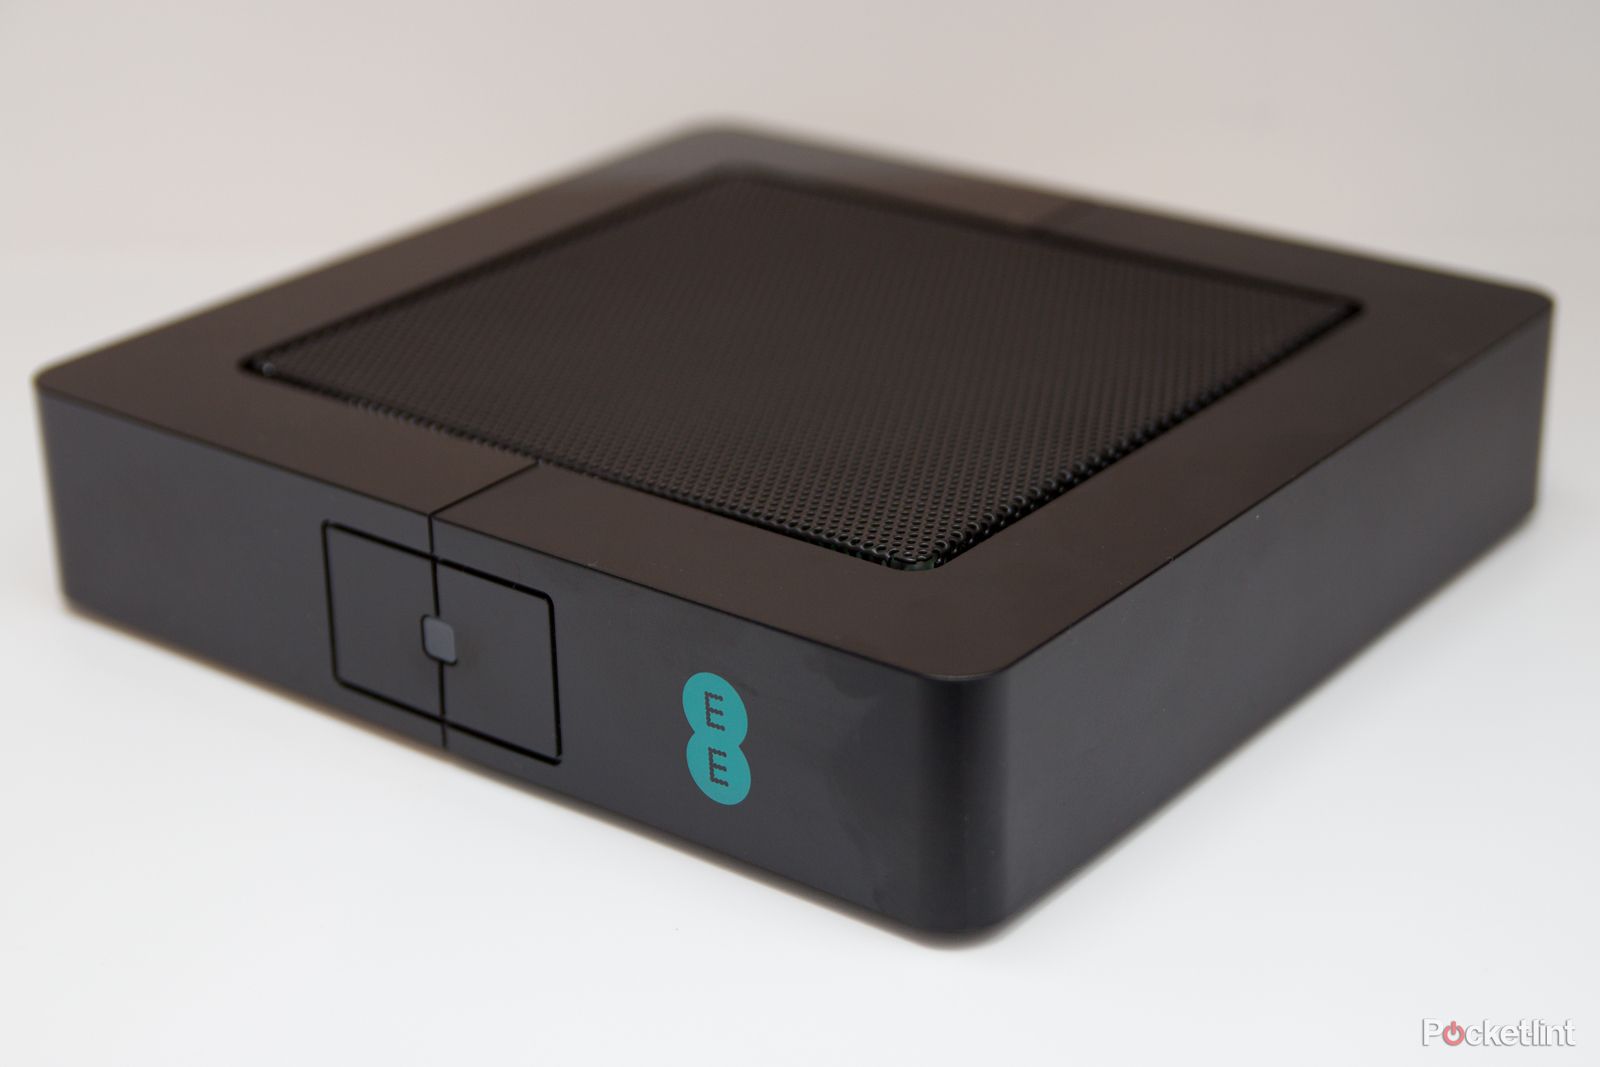 ee tv review image 2